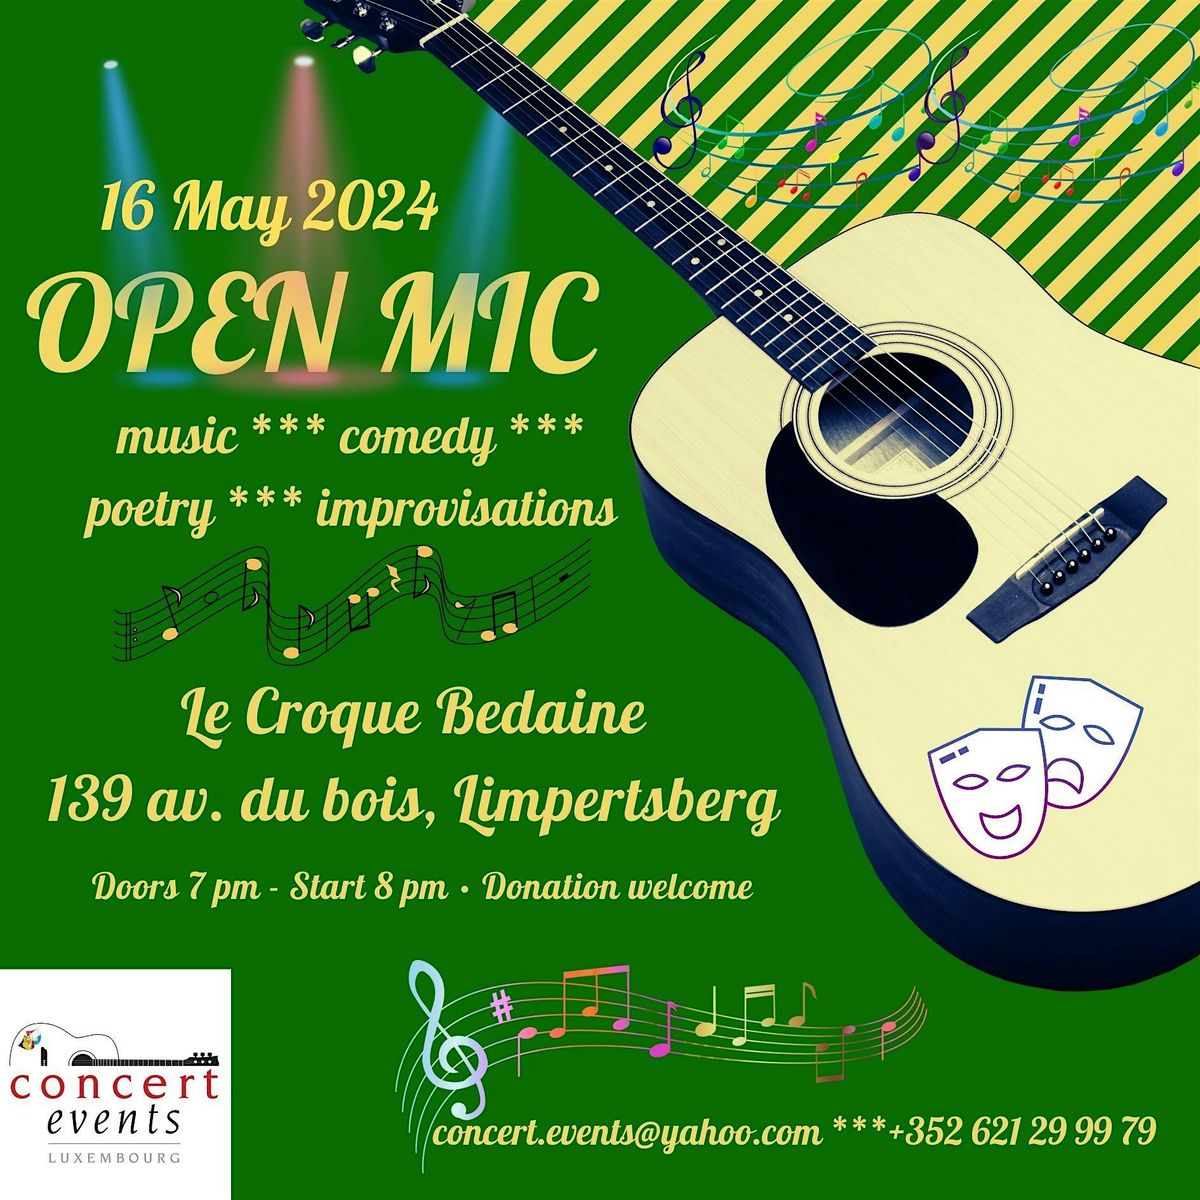 Open mic by Concert Events Luxembourg asbl